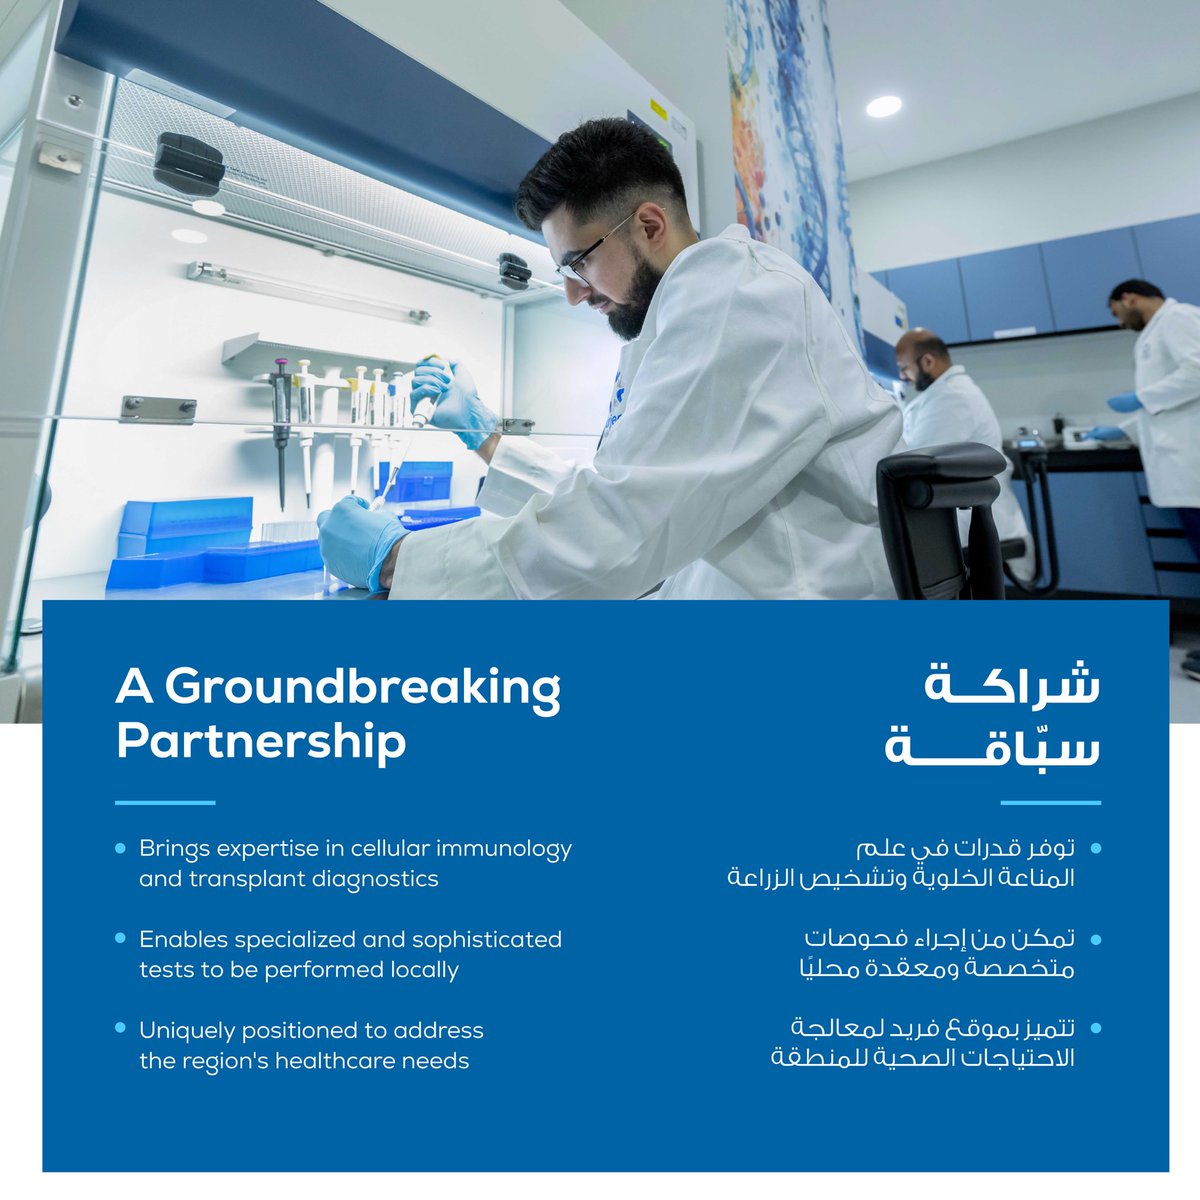 Introducing OncoHelix-CoLab, a first-of-its-kind advanced molecular diagnostics & immune profile testing laboratory. In collaboration with @OncoHelix, the lab @BurjeelMediCity offers specialized diagnostic services for tailored healthcare solutions & improved patient outcomes.